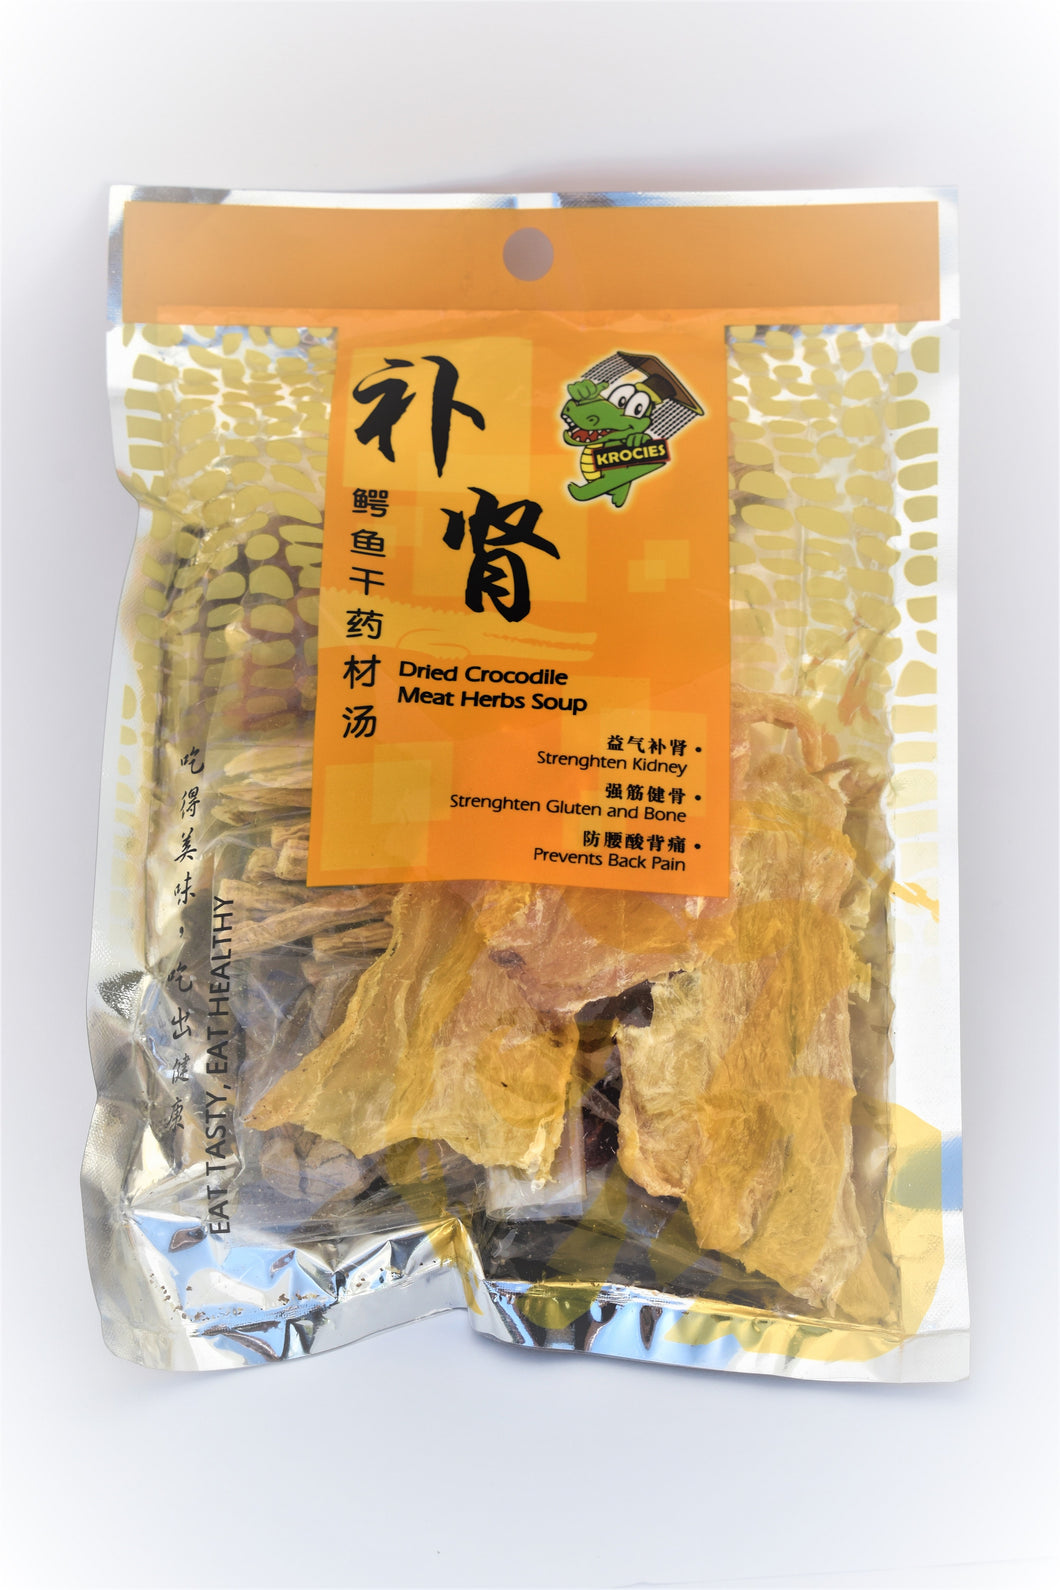 Bu Shen Dried Crocodile Meat Herbs Soup - Protect your Liver/Kidney